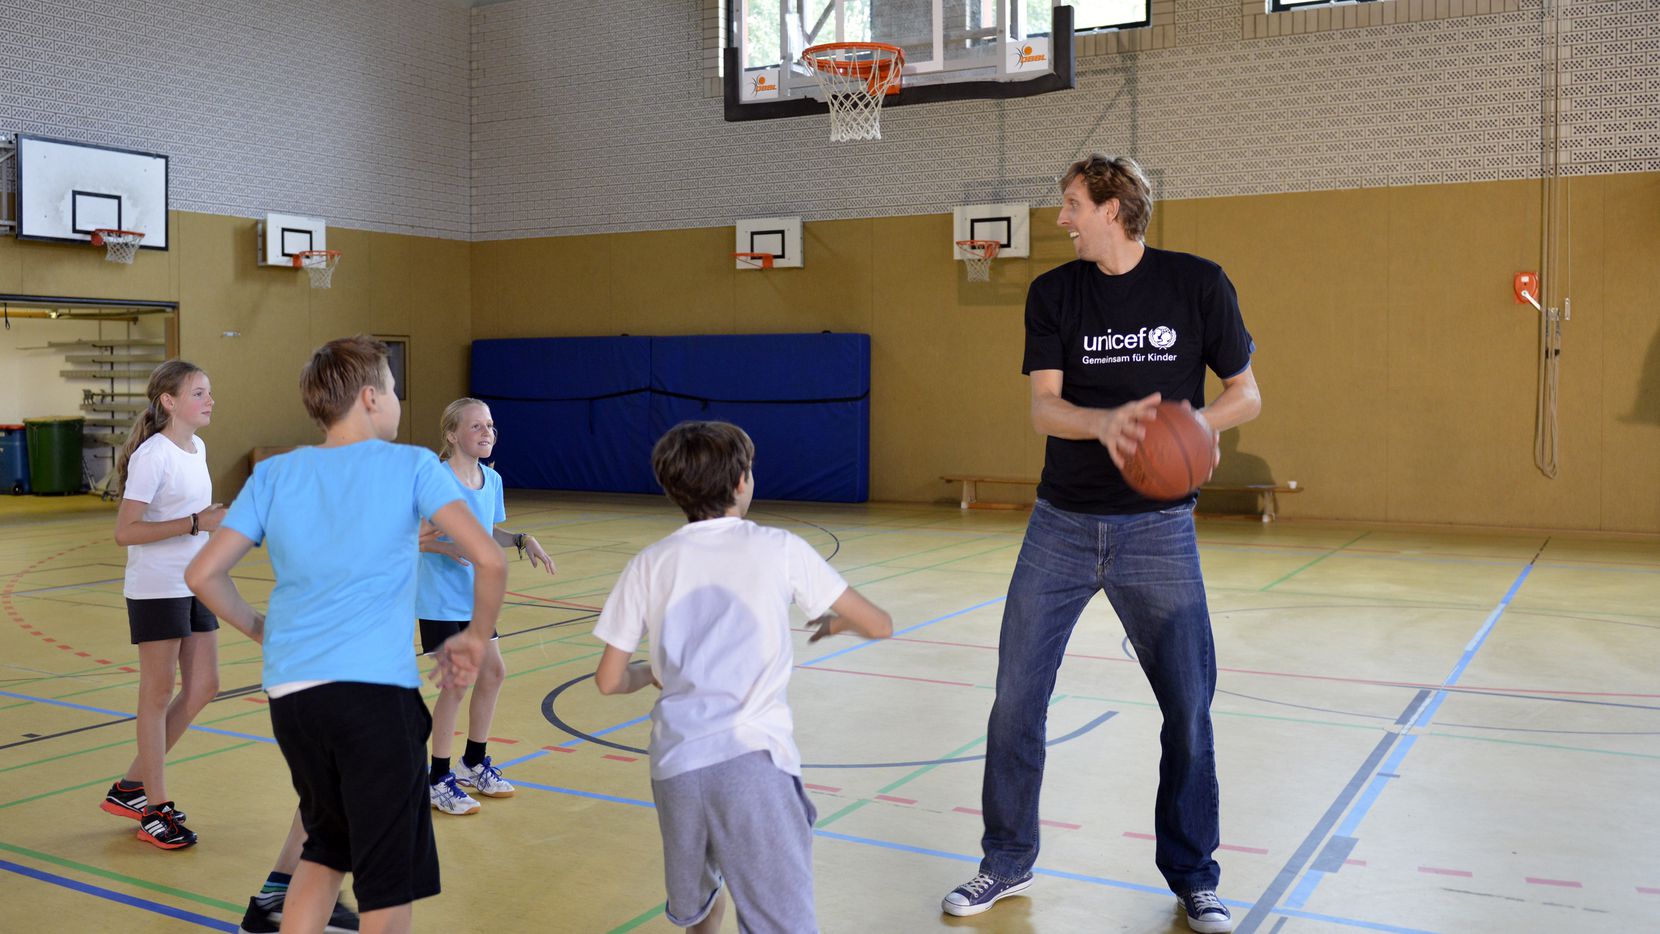 Dirk Nowitzki, playing basketball here with a group of children, will receive the Spirit of...